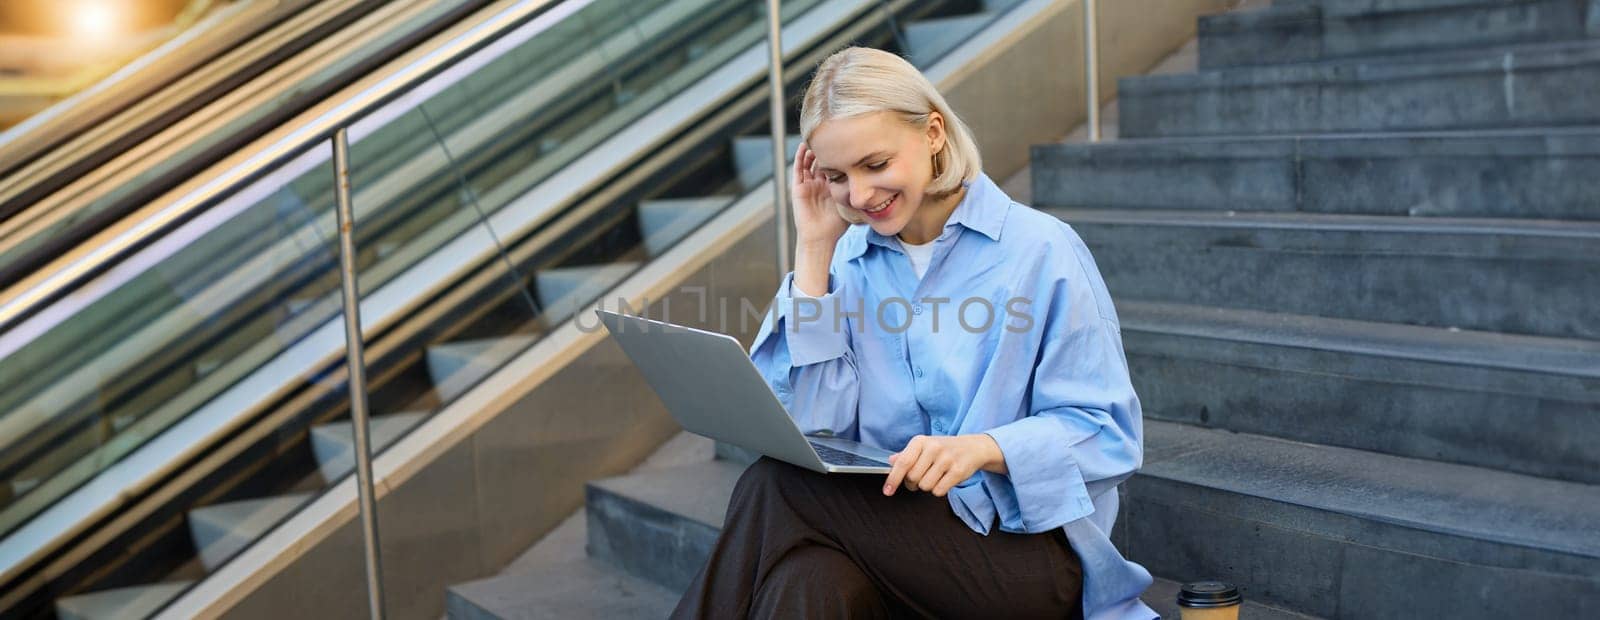 Image of young woman, student studying online, working remotely, sitting on stairs with laptop and drinking coffee in takeaway cup, elearning.